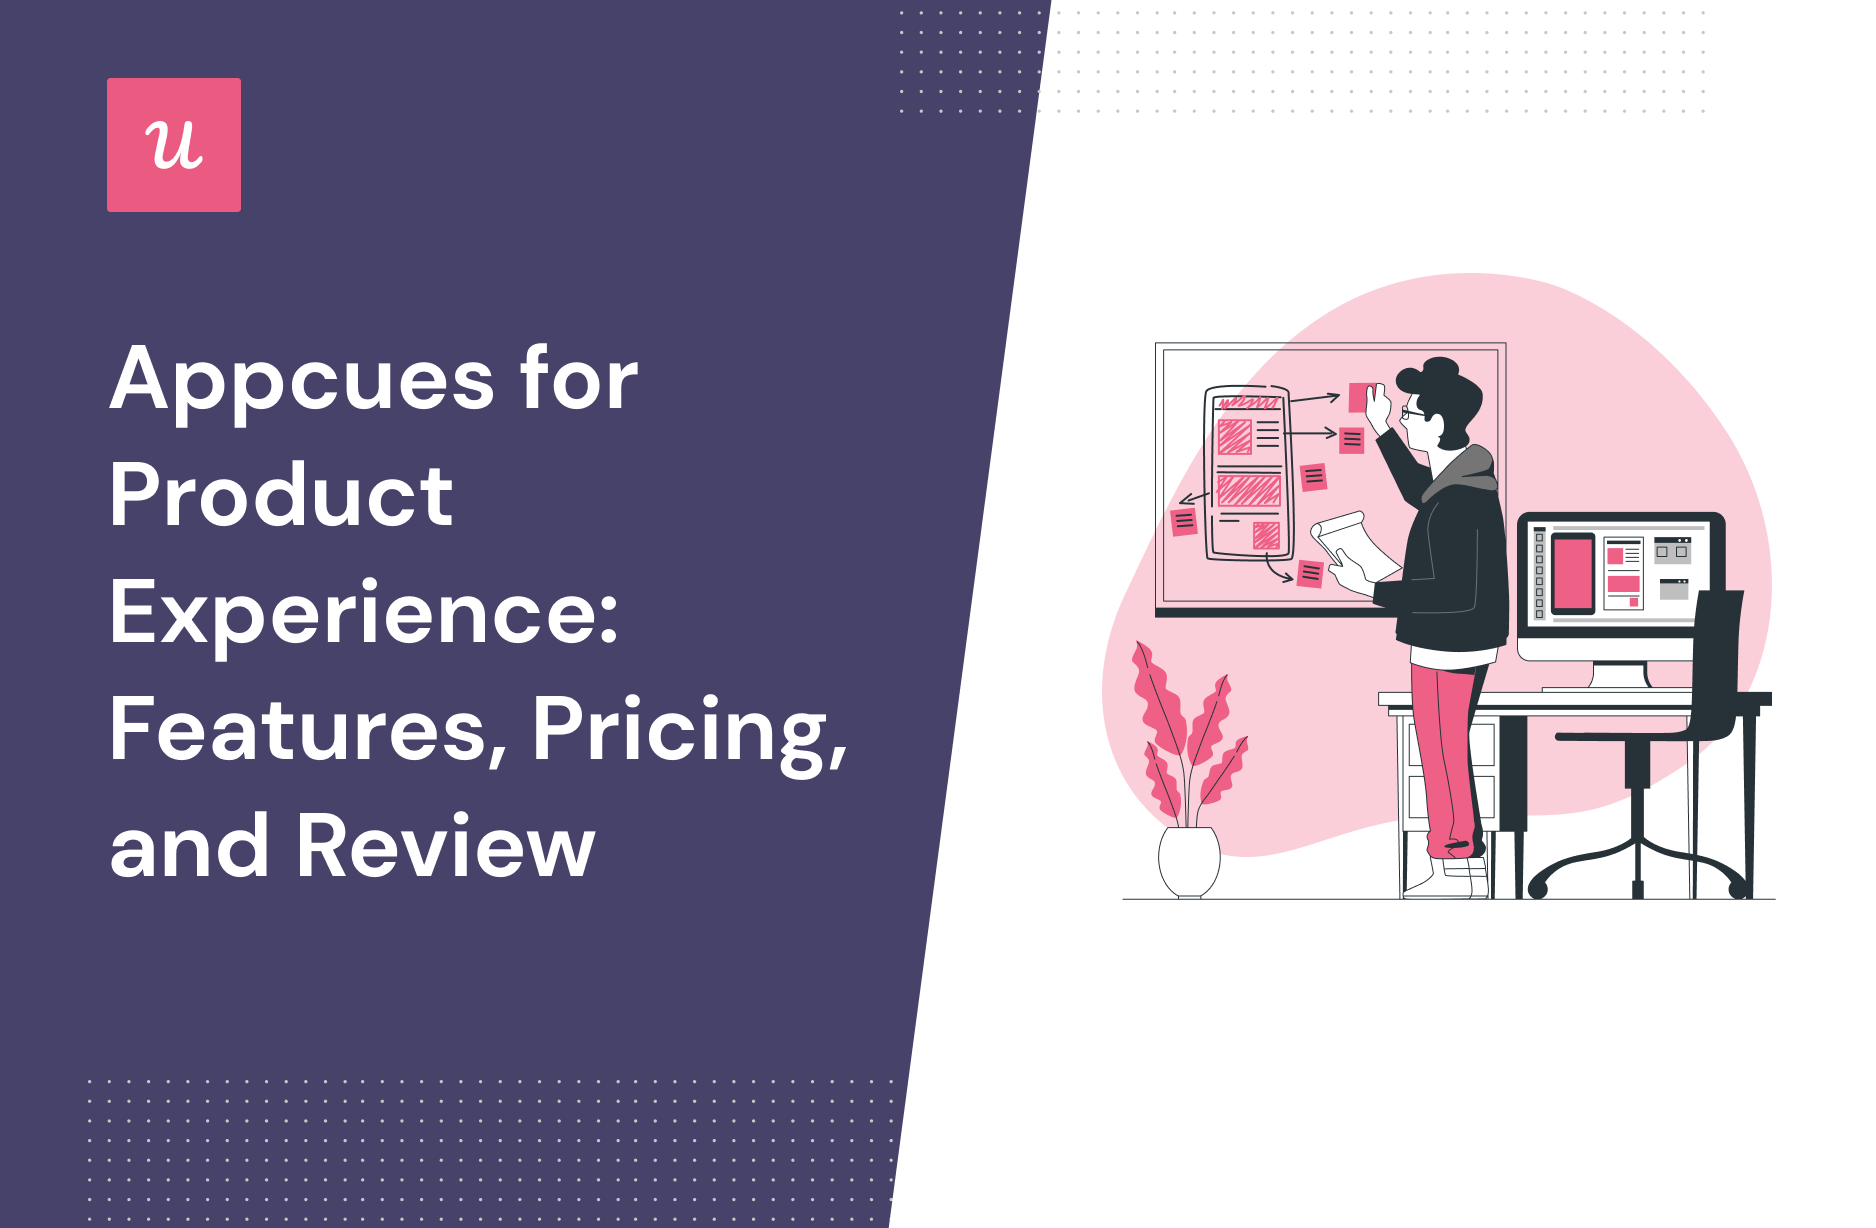 Appcues for Product Experience: Features, Pricing, and Review